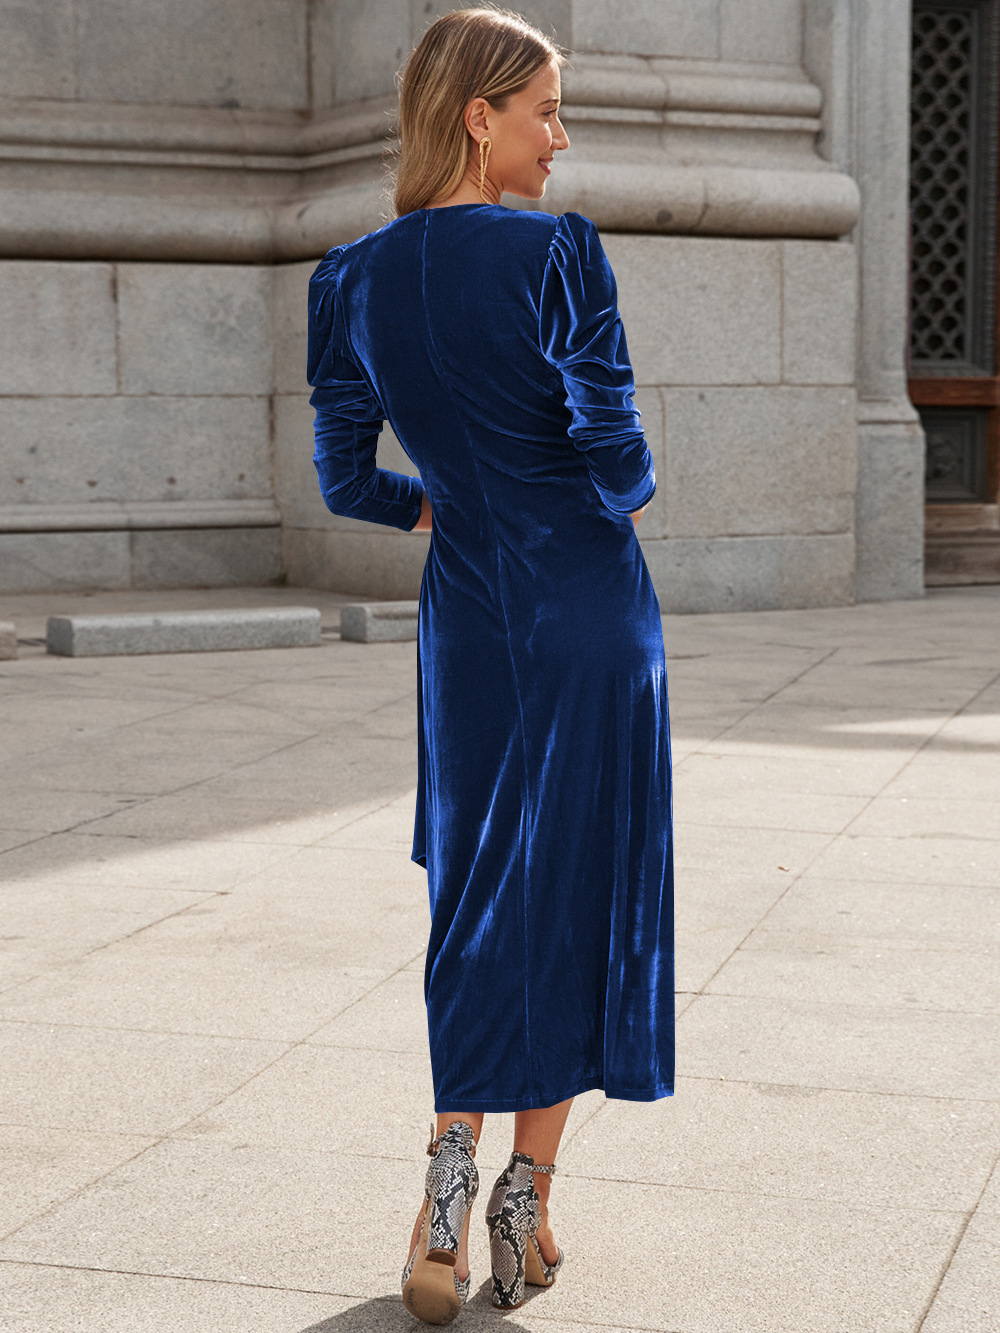 New dress French design elegant long sleeve evening gown canary skirt